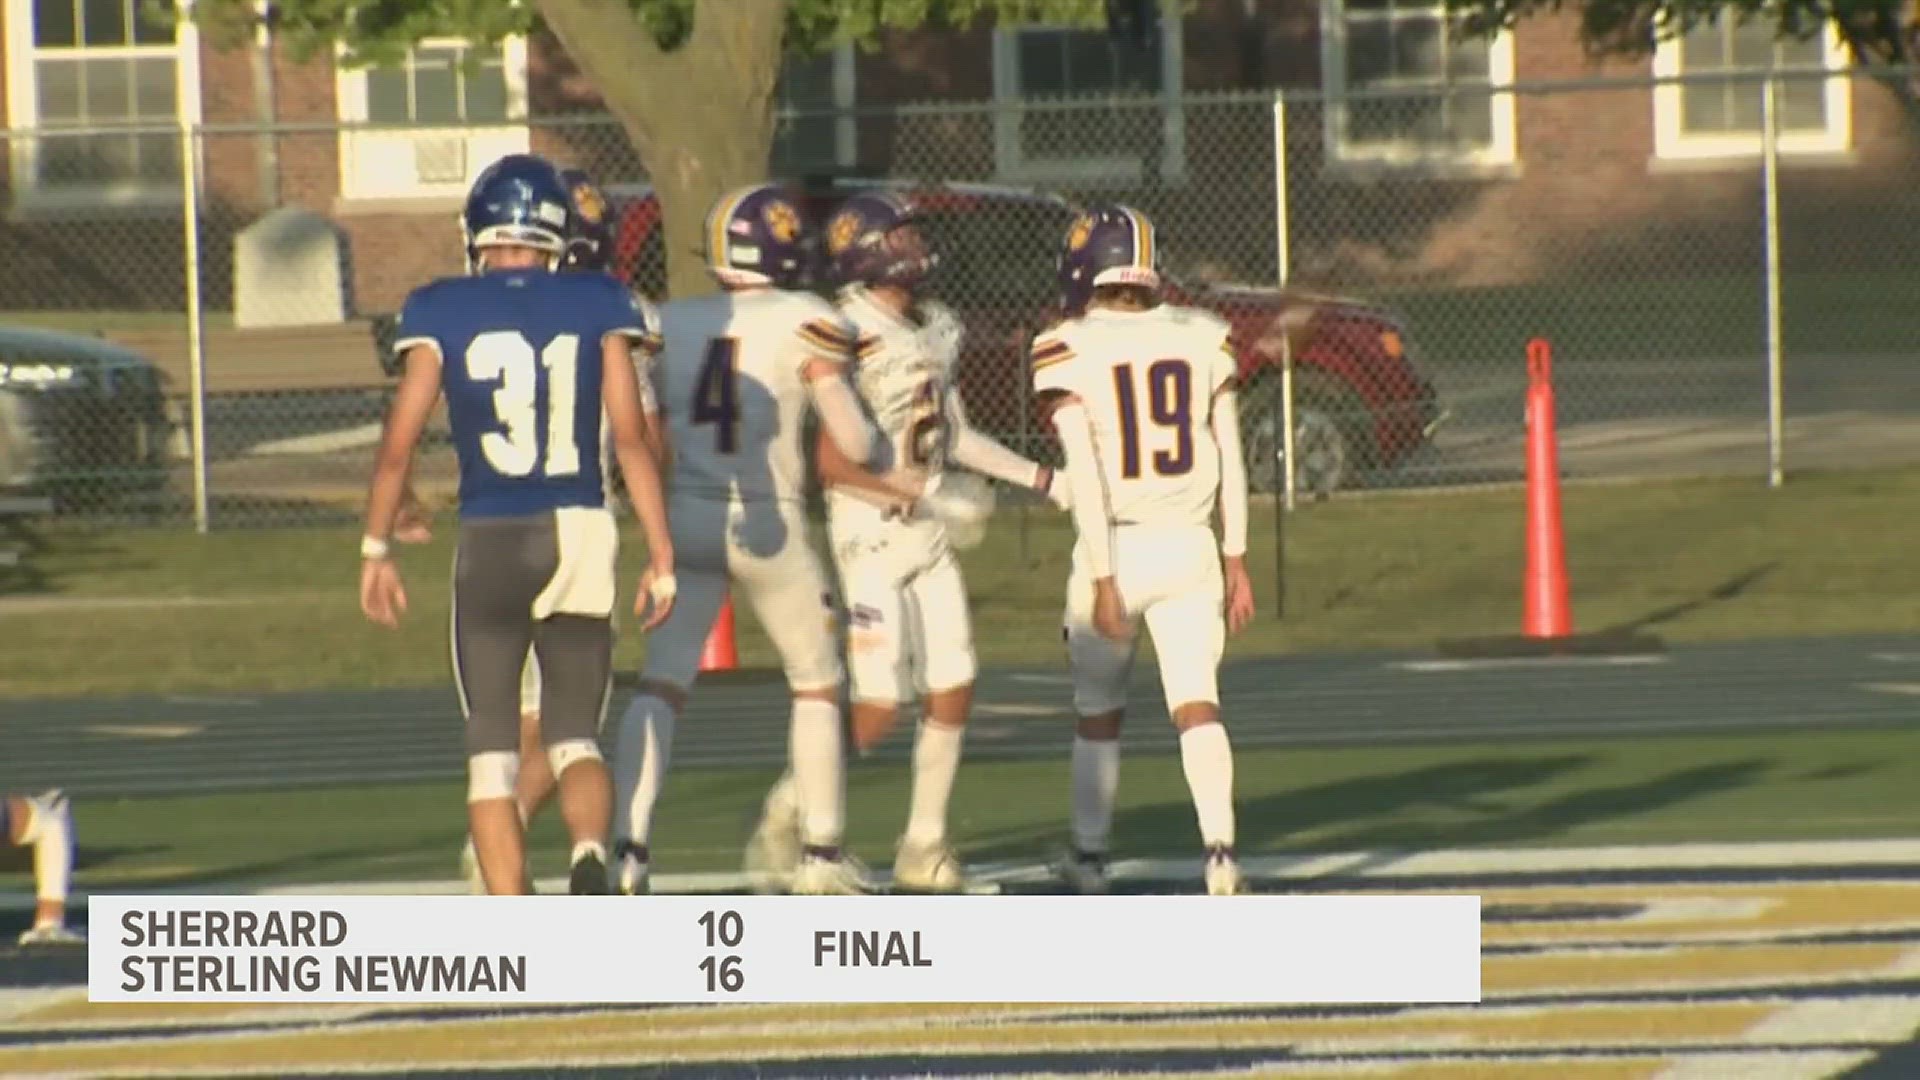 Sterling Newman would move to 2-o on the season with a 16-10 win over Sherrard. The Tigers are no 0-2 on the year.